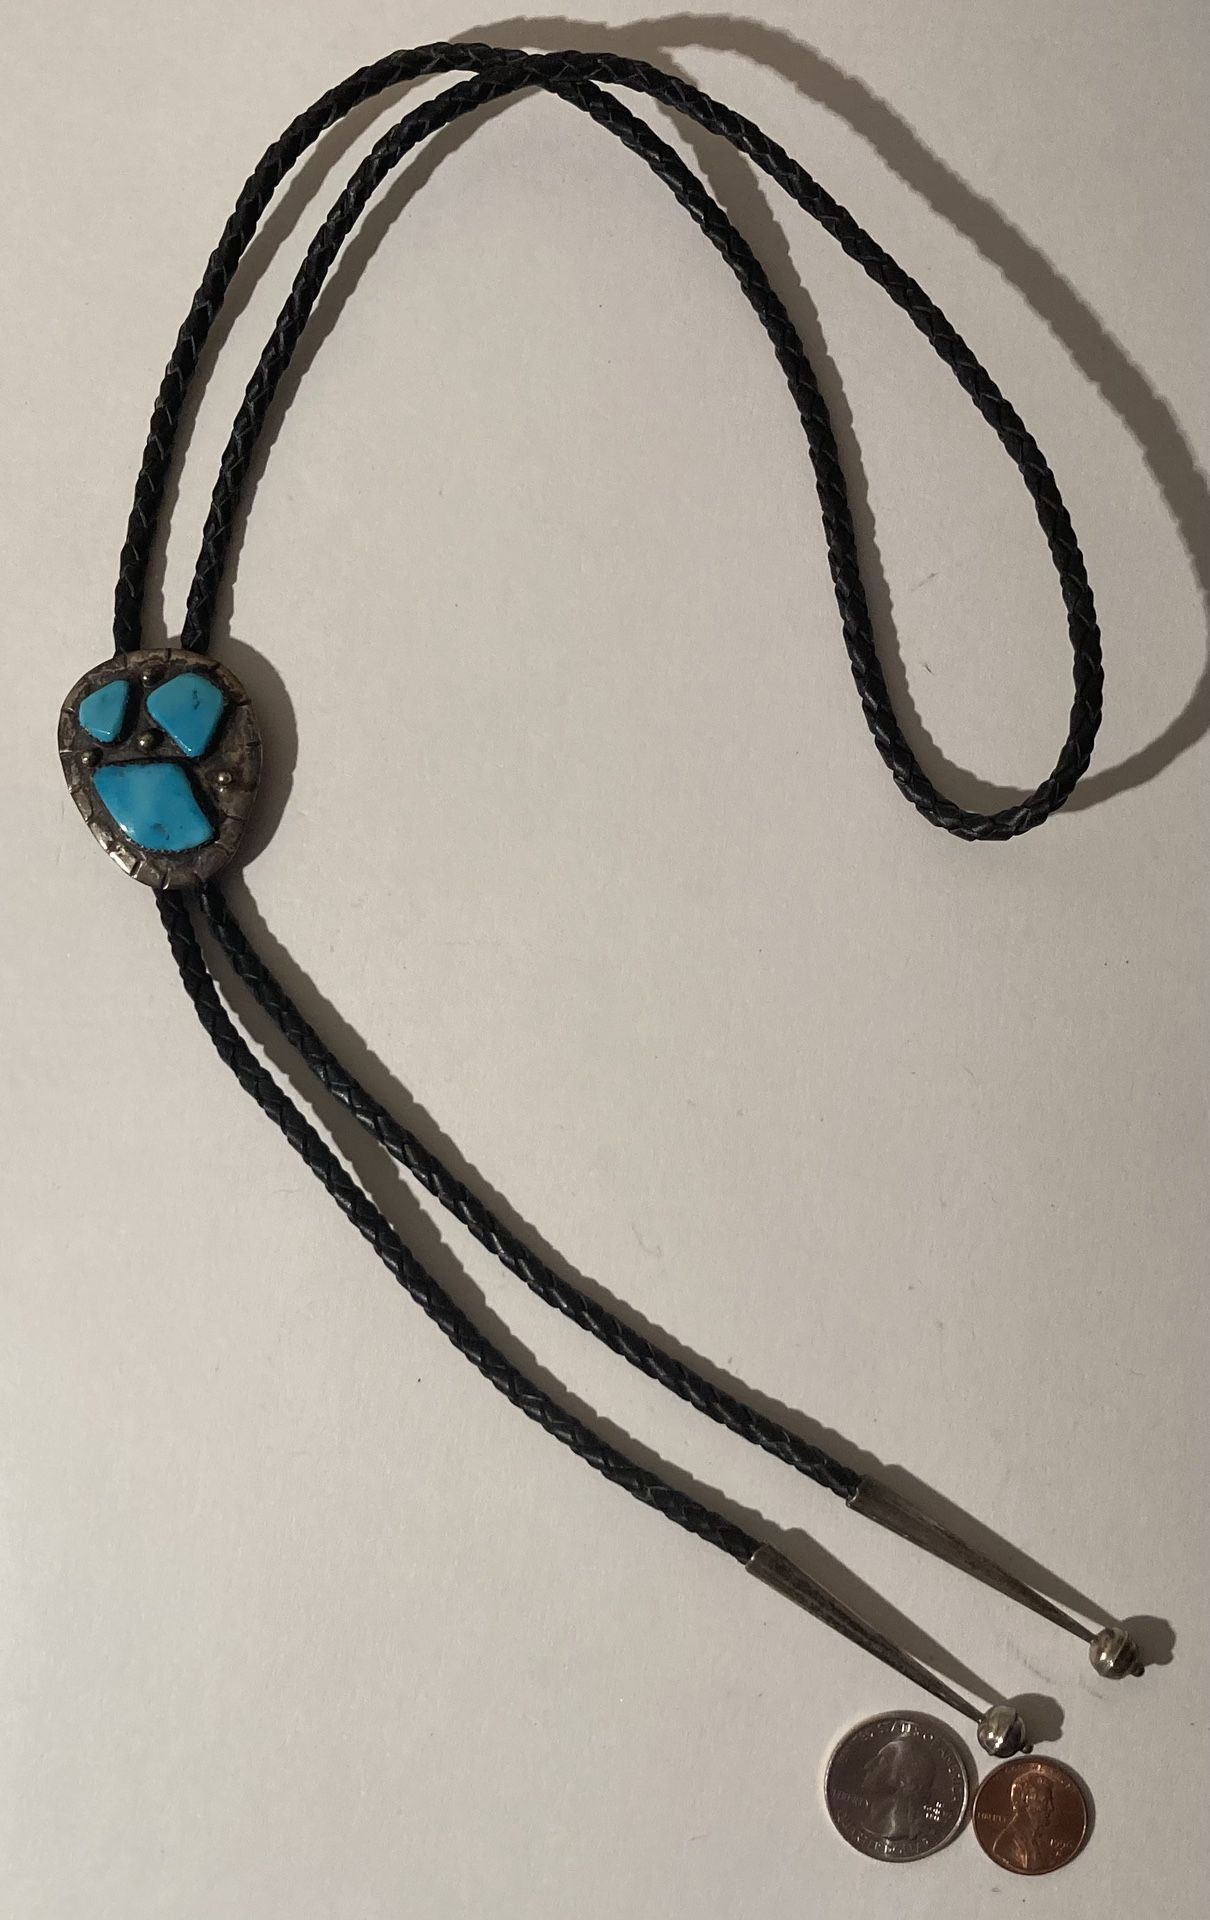 Vintage Bolo Tie Silver With Turquoise Stones Quality